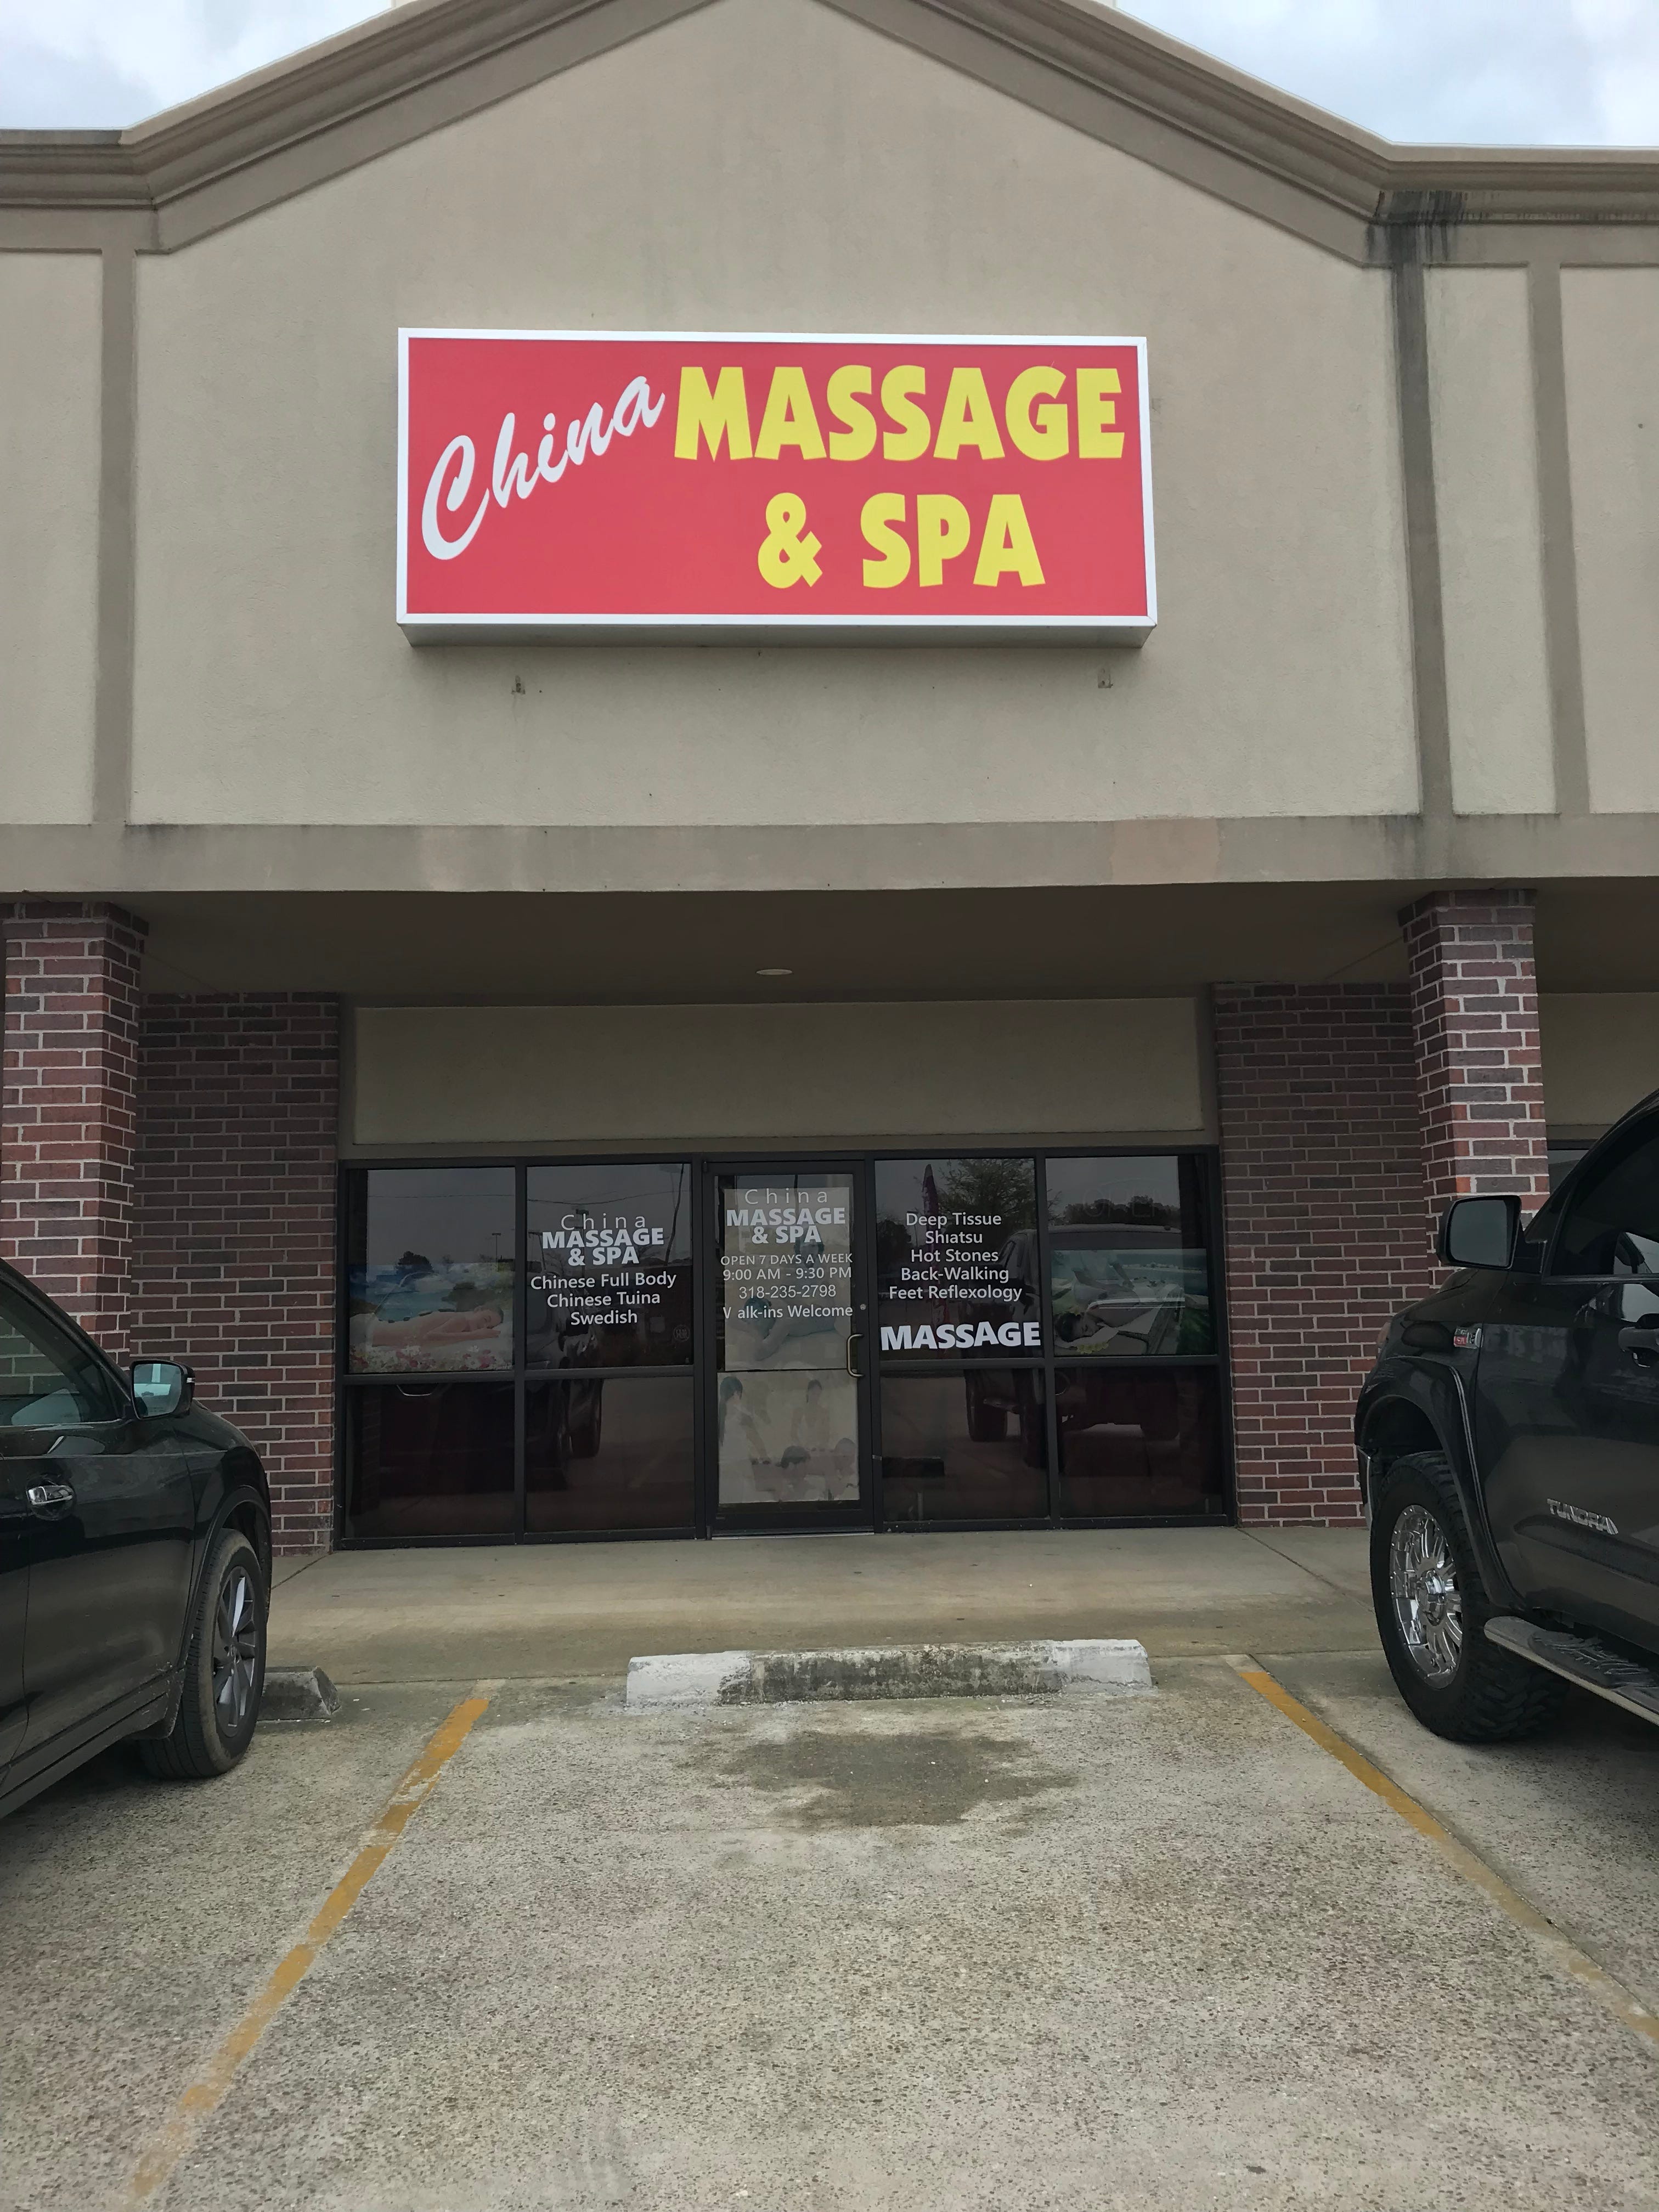 Workers From 2 Wm Chinese Massage Parlors Arrested In Prostitution Sting